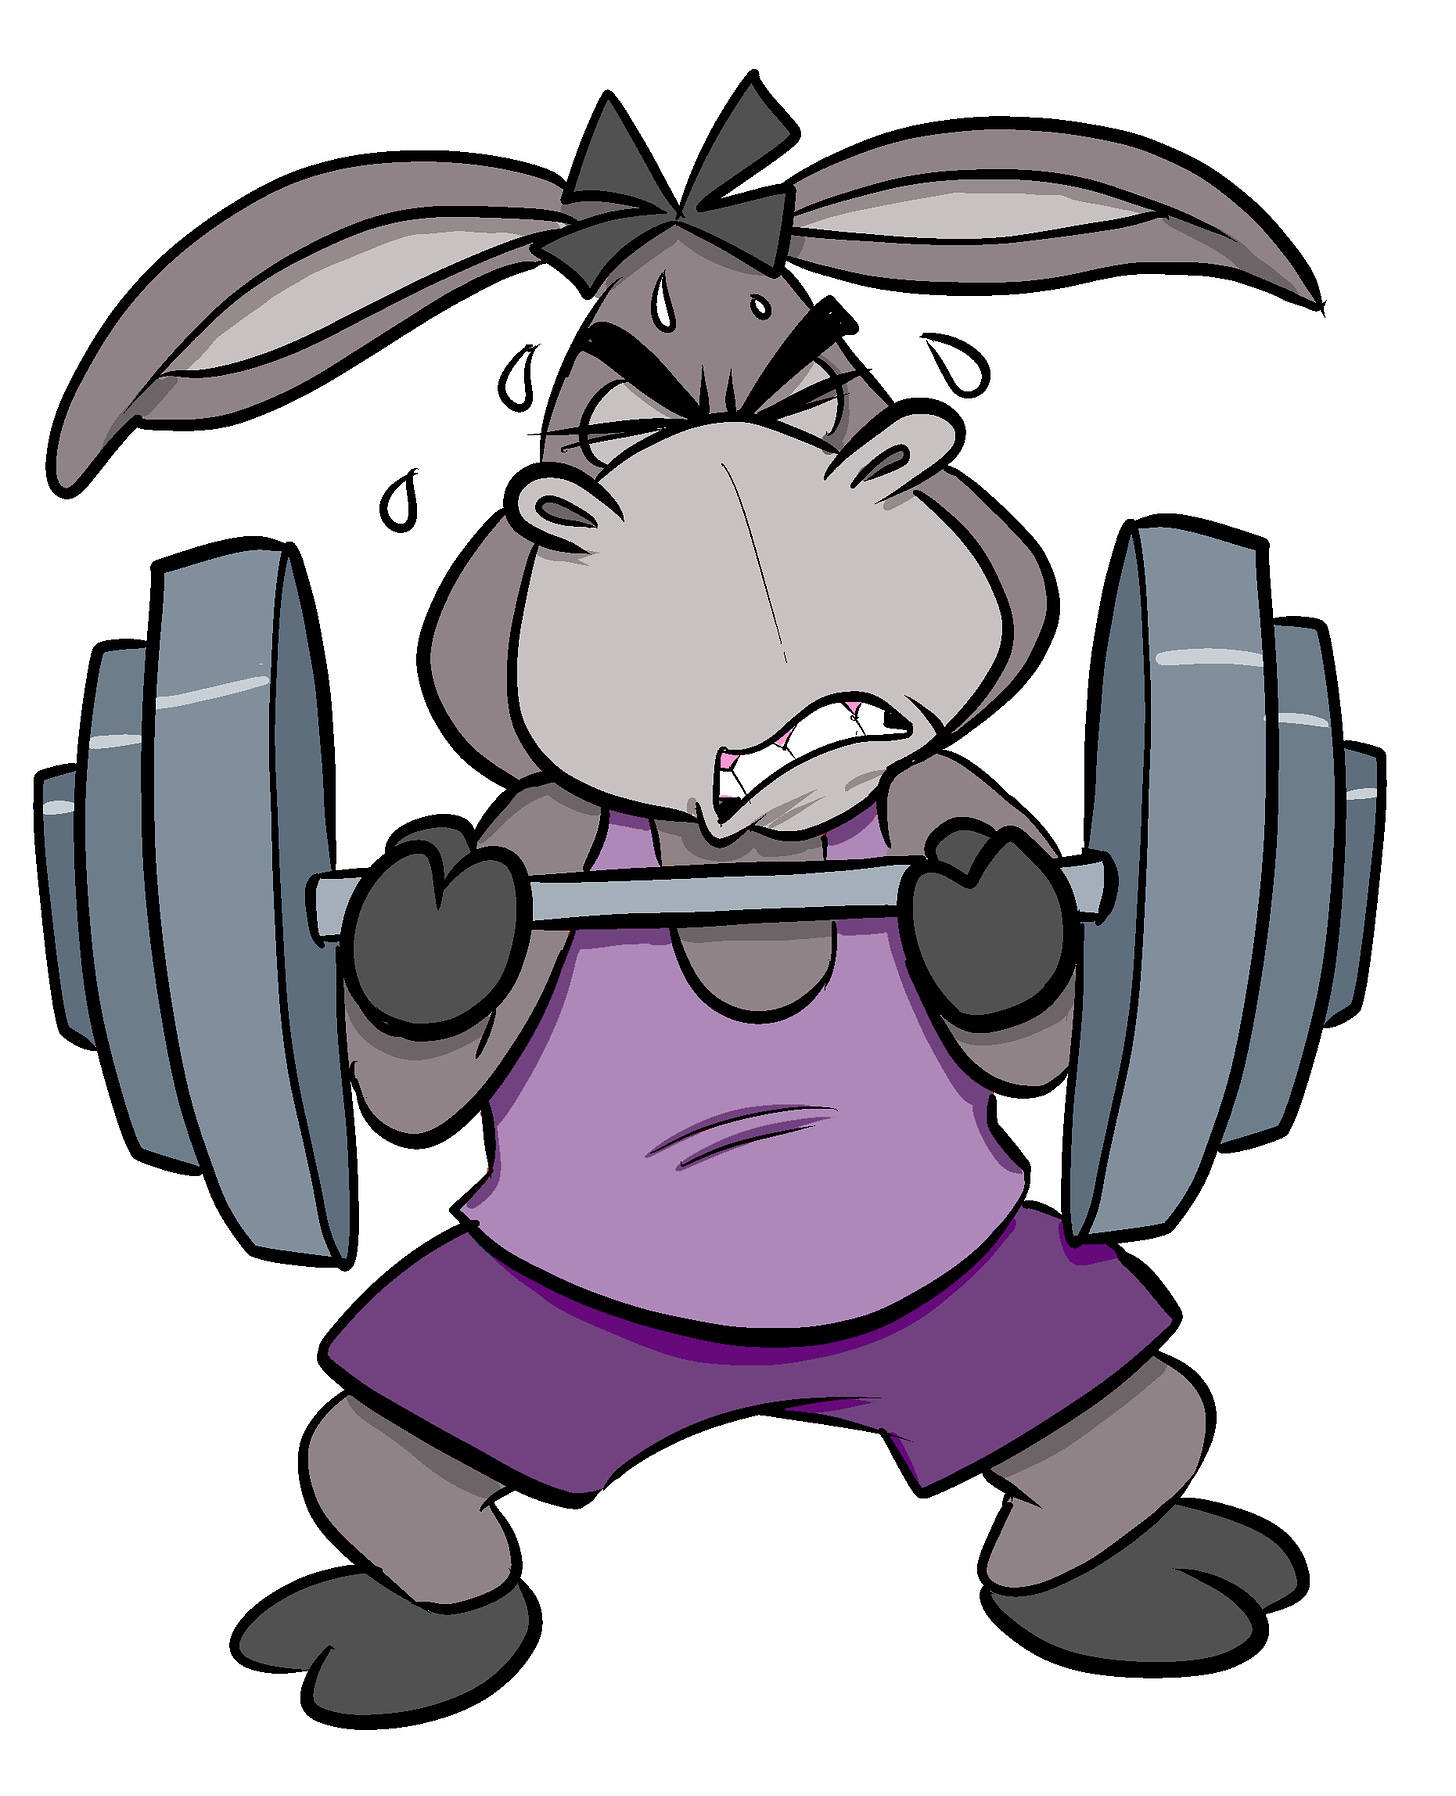 A donkey lifting weights.